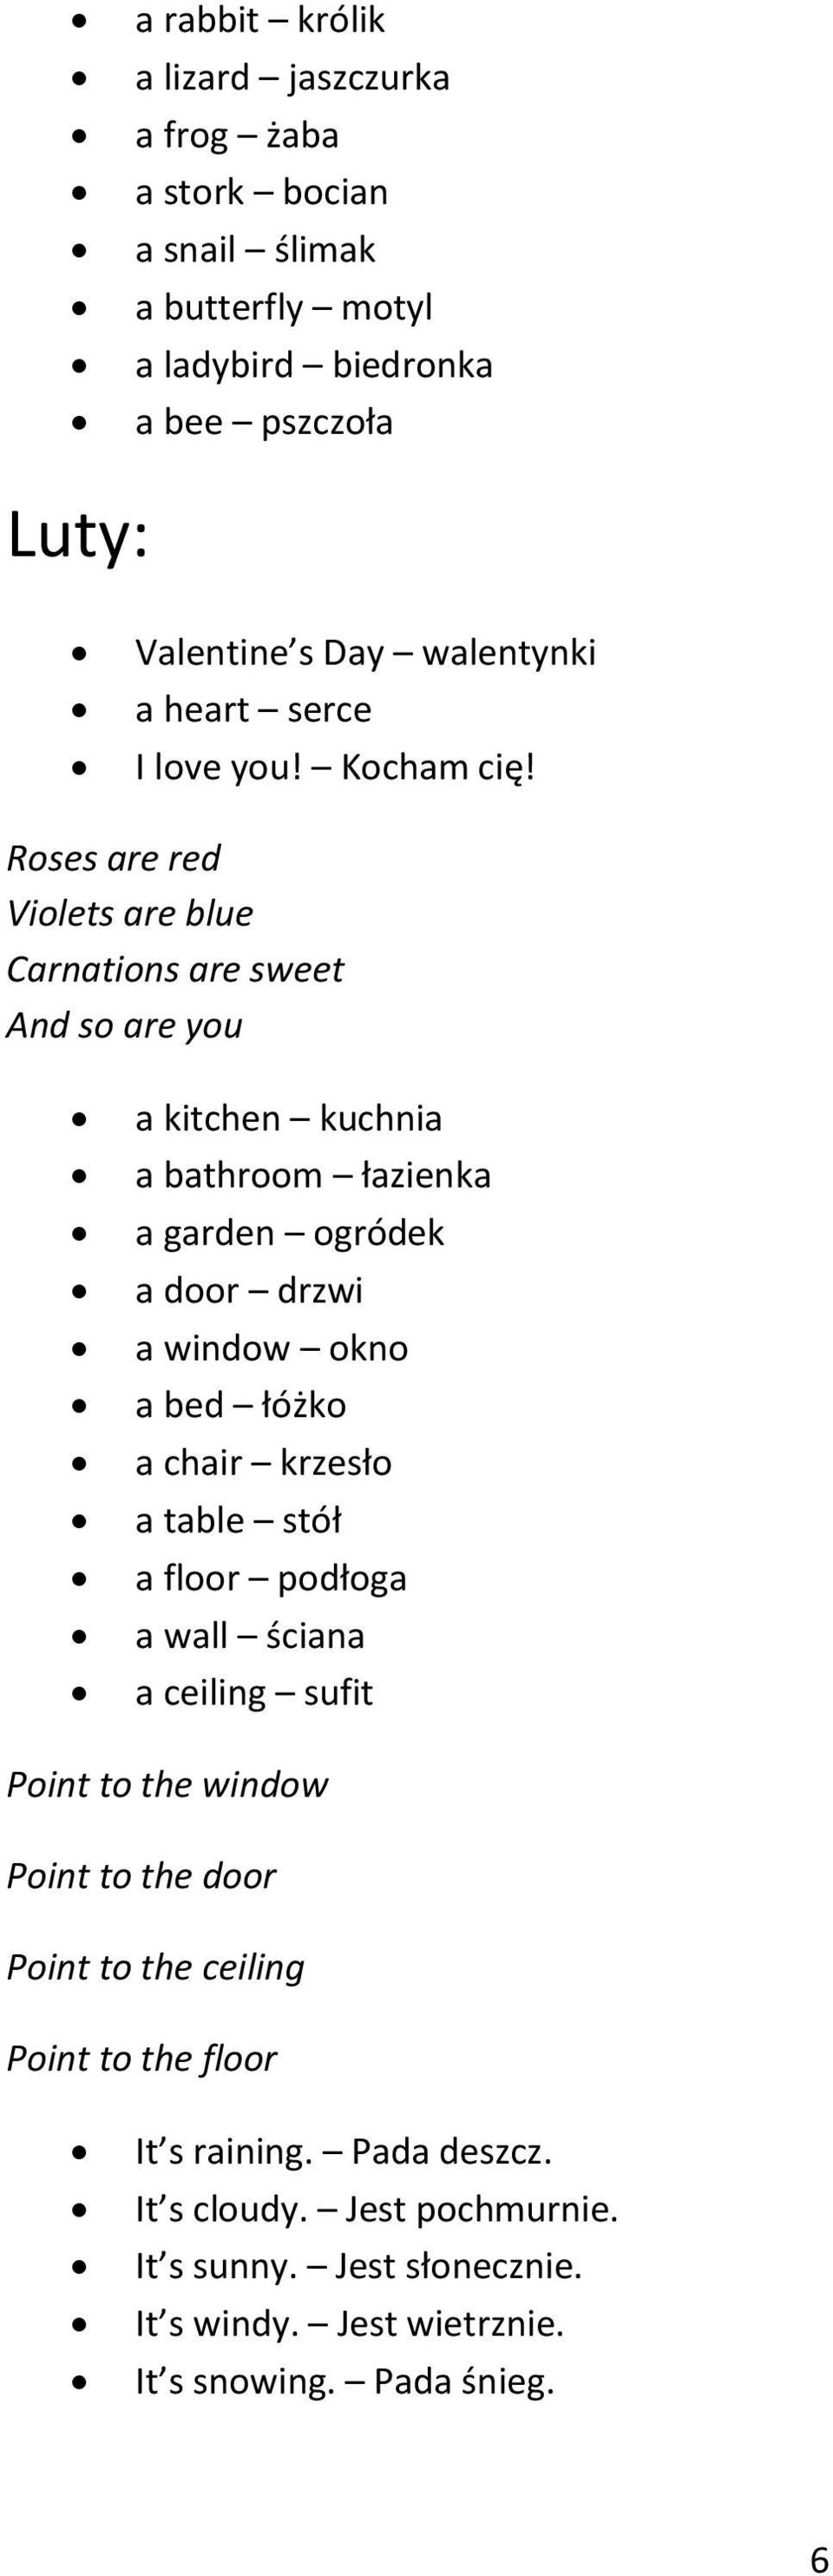 Roses are red Violets are blue Carnations are sweet And so are you a kitchen kuchnia a bathroom łazienka a garden ogródek a door drzwi a window okno a bed łóżko a